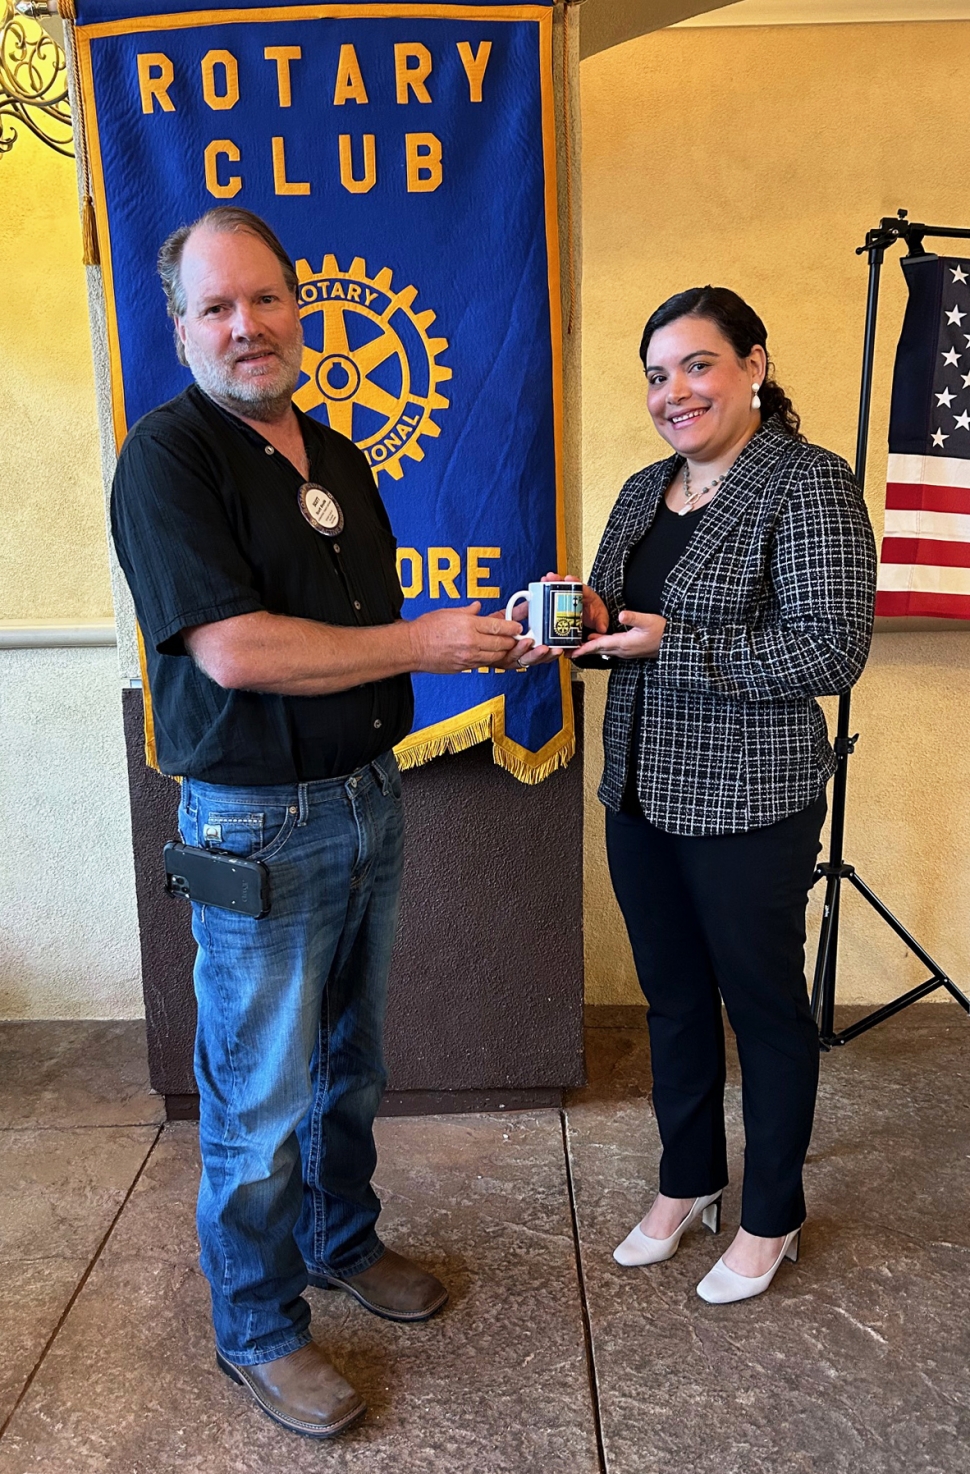 Pictured (l-r) is Rotary Club President Scott Beylik presenting Fillmore Assistant City Manager Erika Herrera with a Rotary mug as a thank you for being last week’s guest speaker. At the meeting Erika Herrera informed the Club that the City of Fillmore is committed to keeping residents informed about various departments, events, and initiatives through its digital platform. By signing up for the “Notify Me” feature on the City’s website, go to www.fillmoreca.gov, residents can receive timely alerts and stay updated on important matters. You can scroll down on the website and view two calendars 1. Council meetings and 2. Events calendar. Photo credit Martha Richardson.